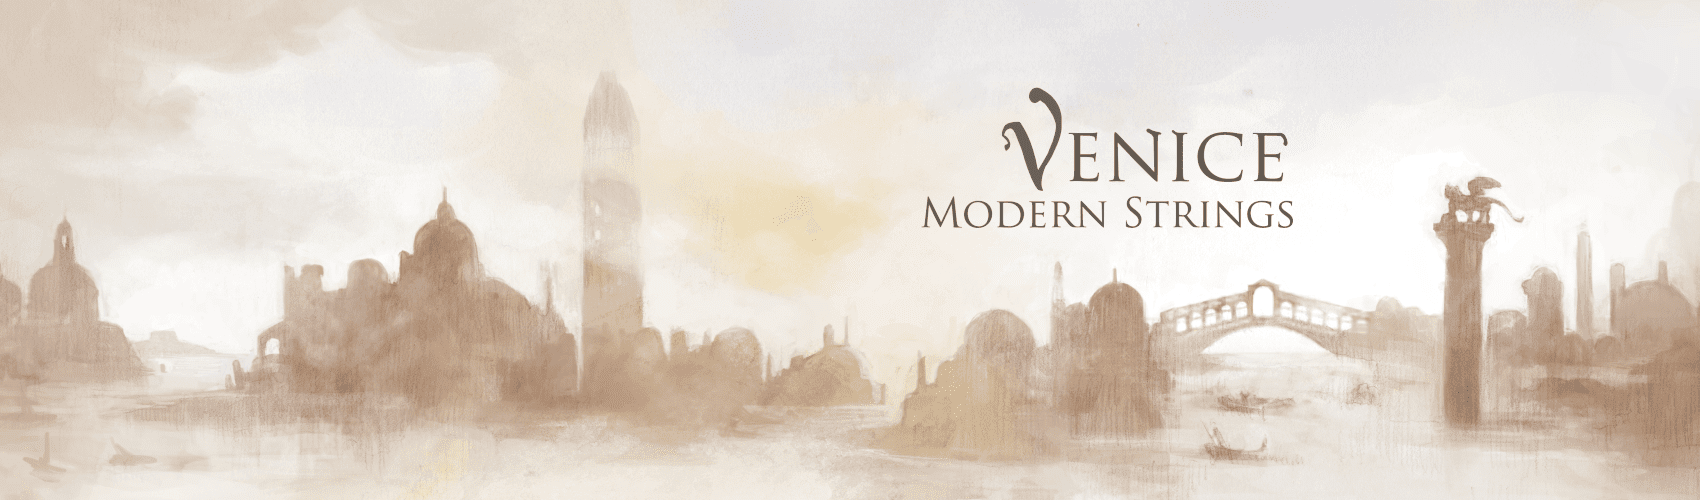 Venice Modern Strings by FluffyAudio Released